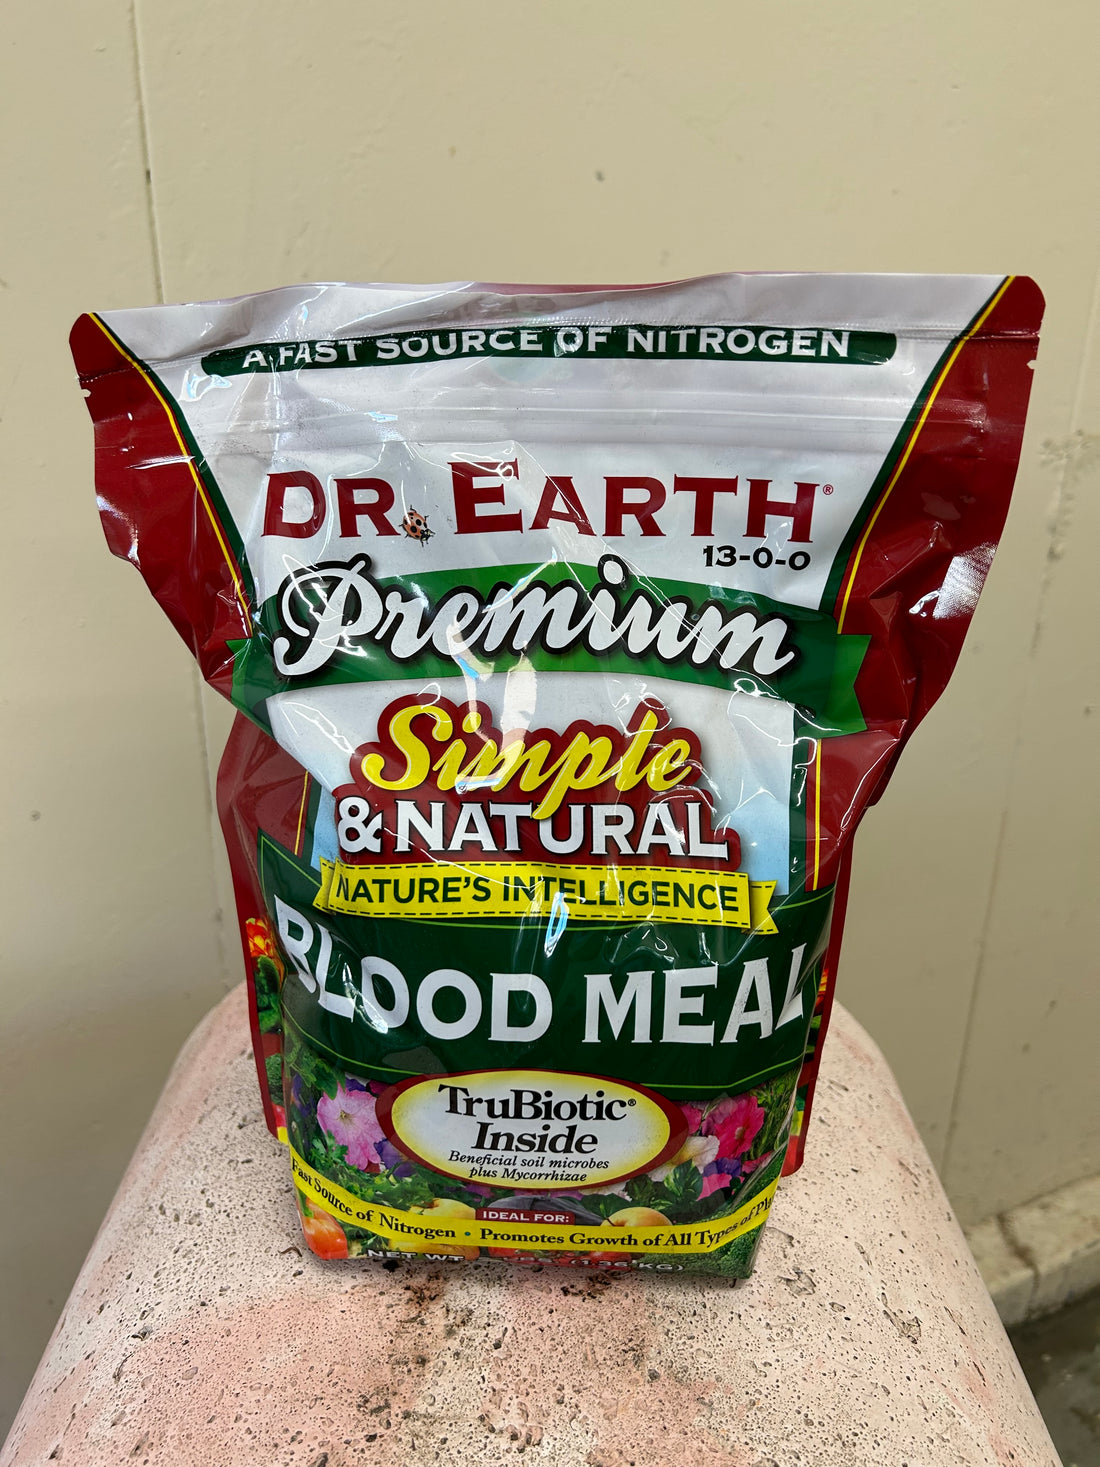 Dr. Earth Premium Blood Meal 13-0-0